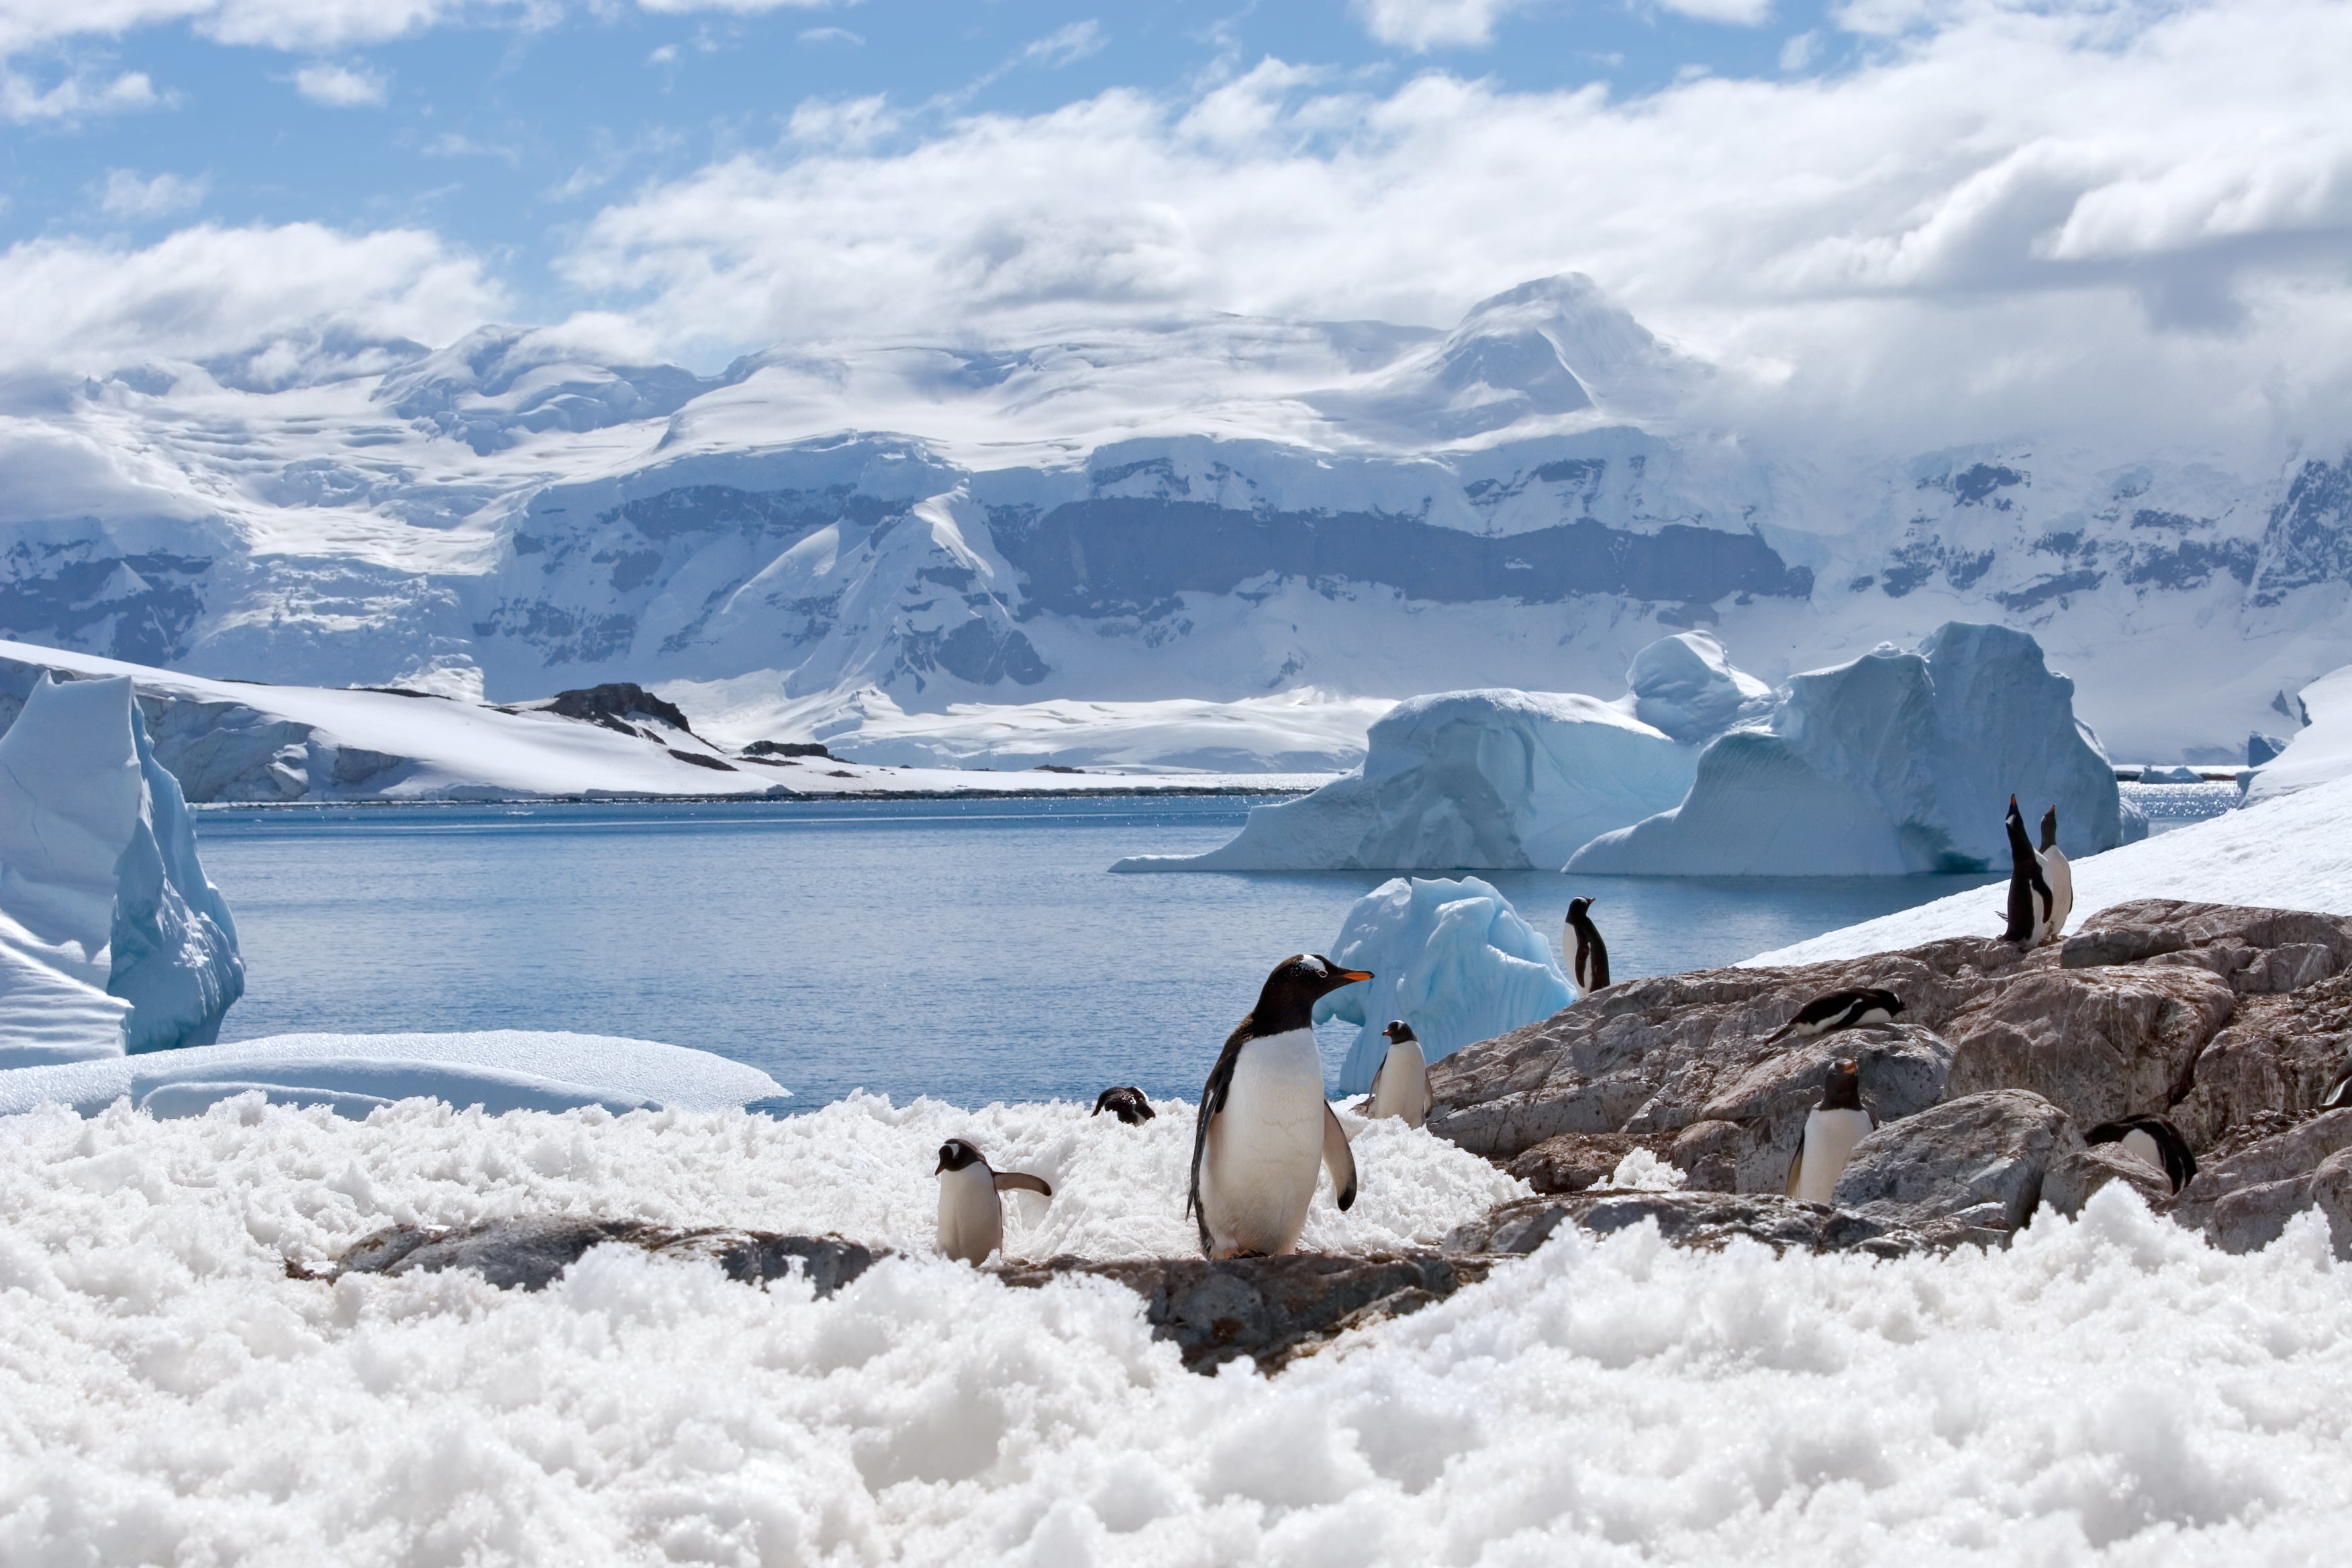 Penguins in the South Pole, home to average temperatures of -50C